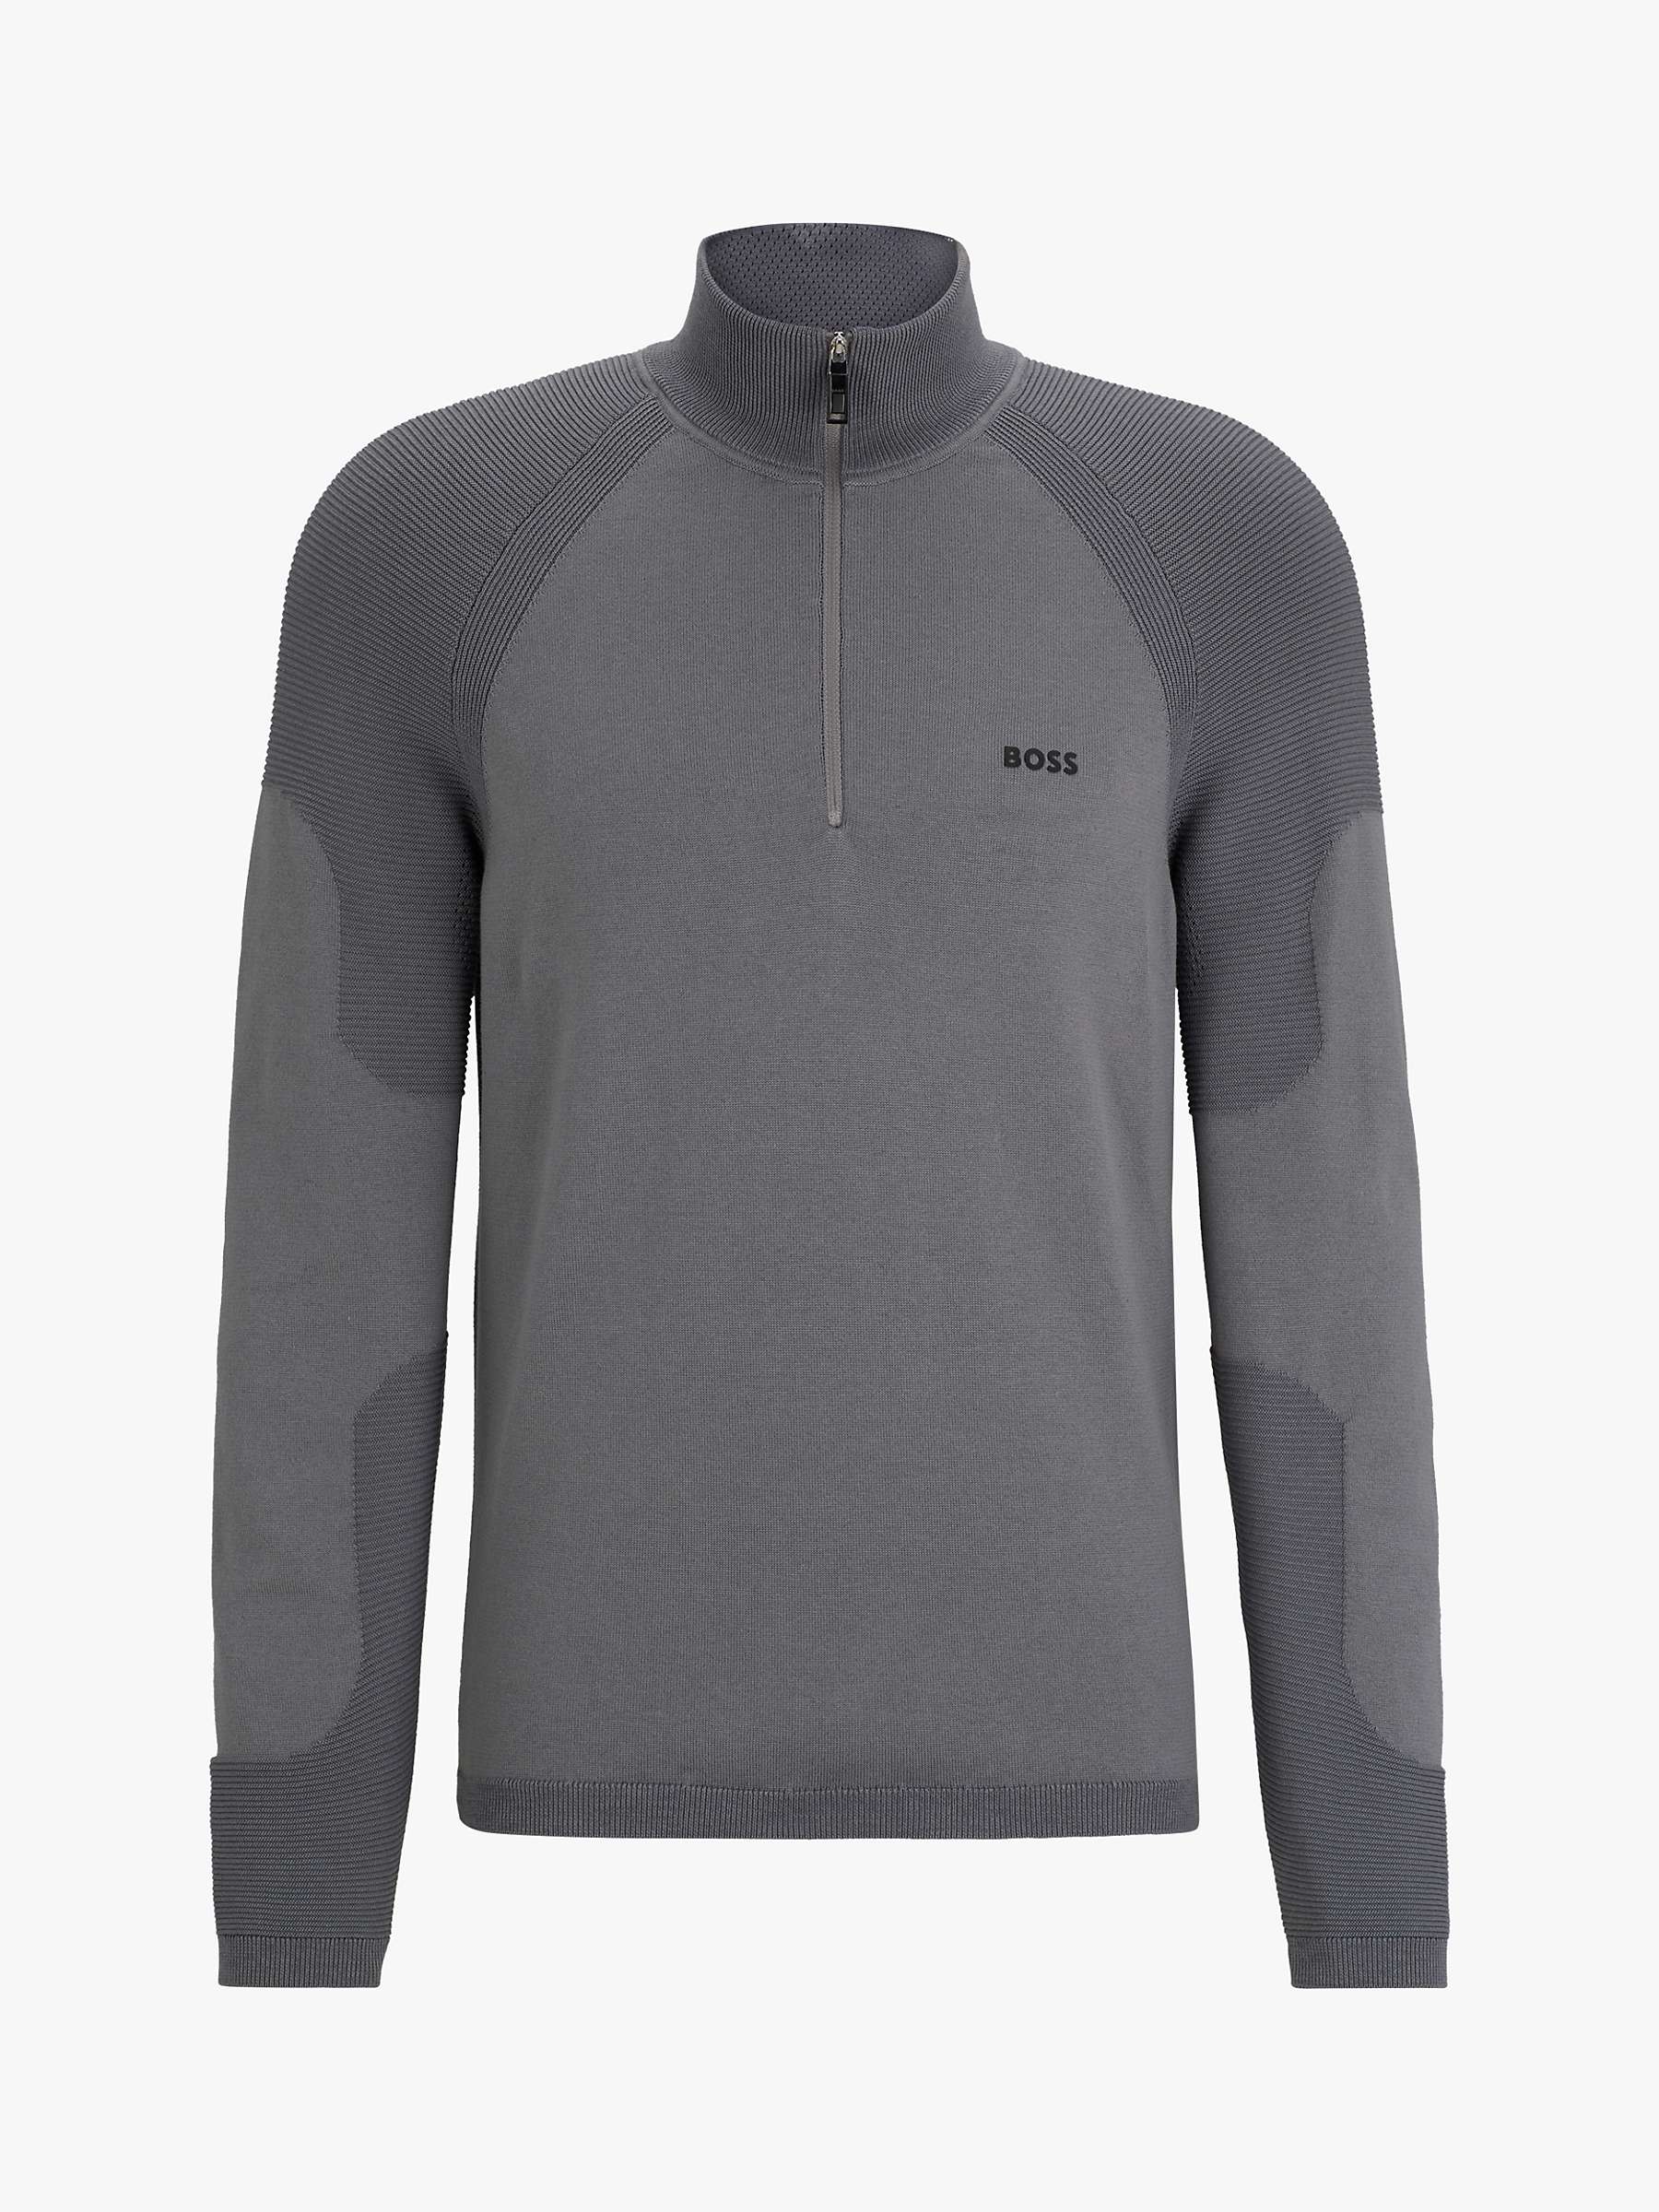 Buy BOSS Perform-X Thermo-Flex Bi-Cotton Knitted Jumper, Grey Online at johnlewis.com